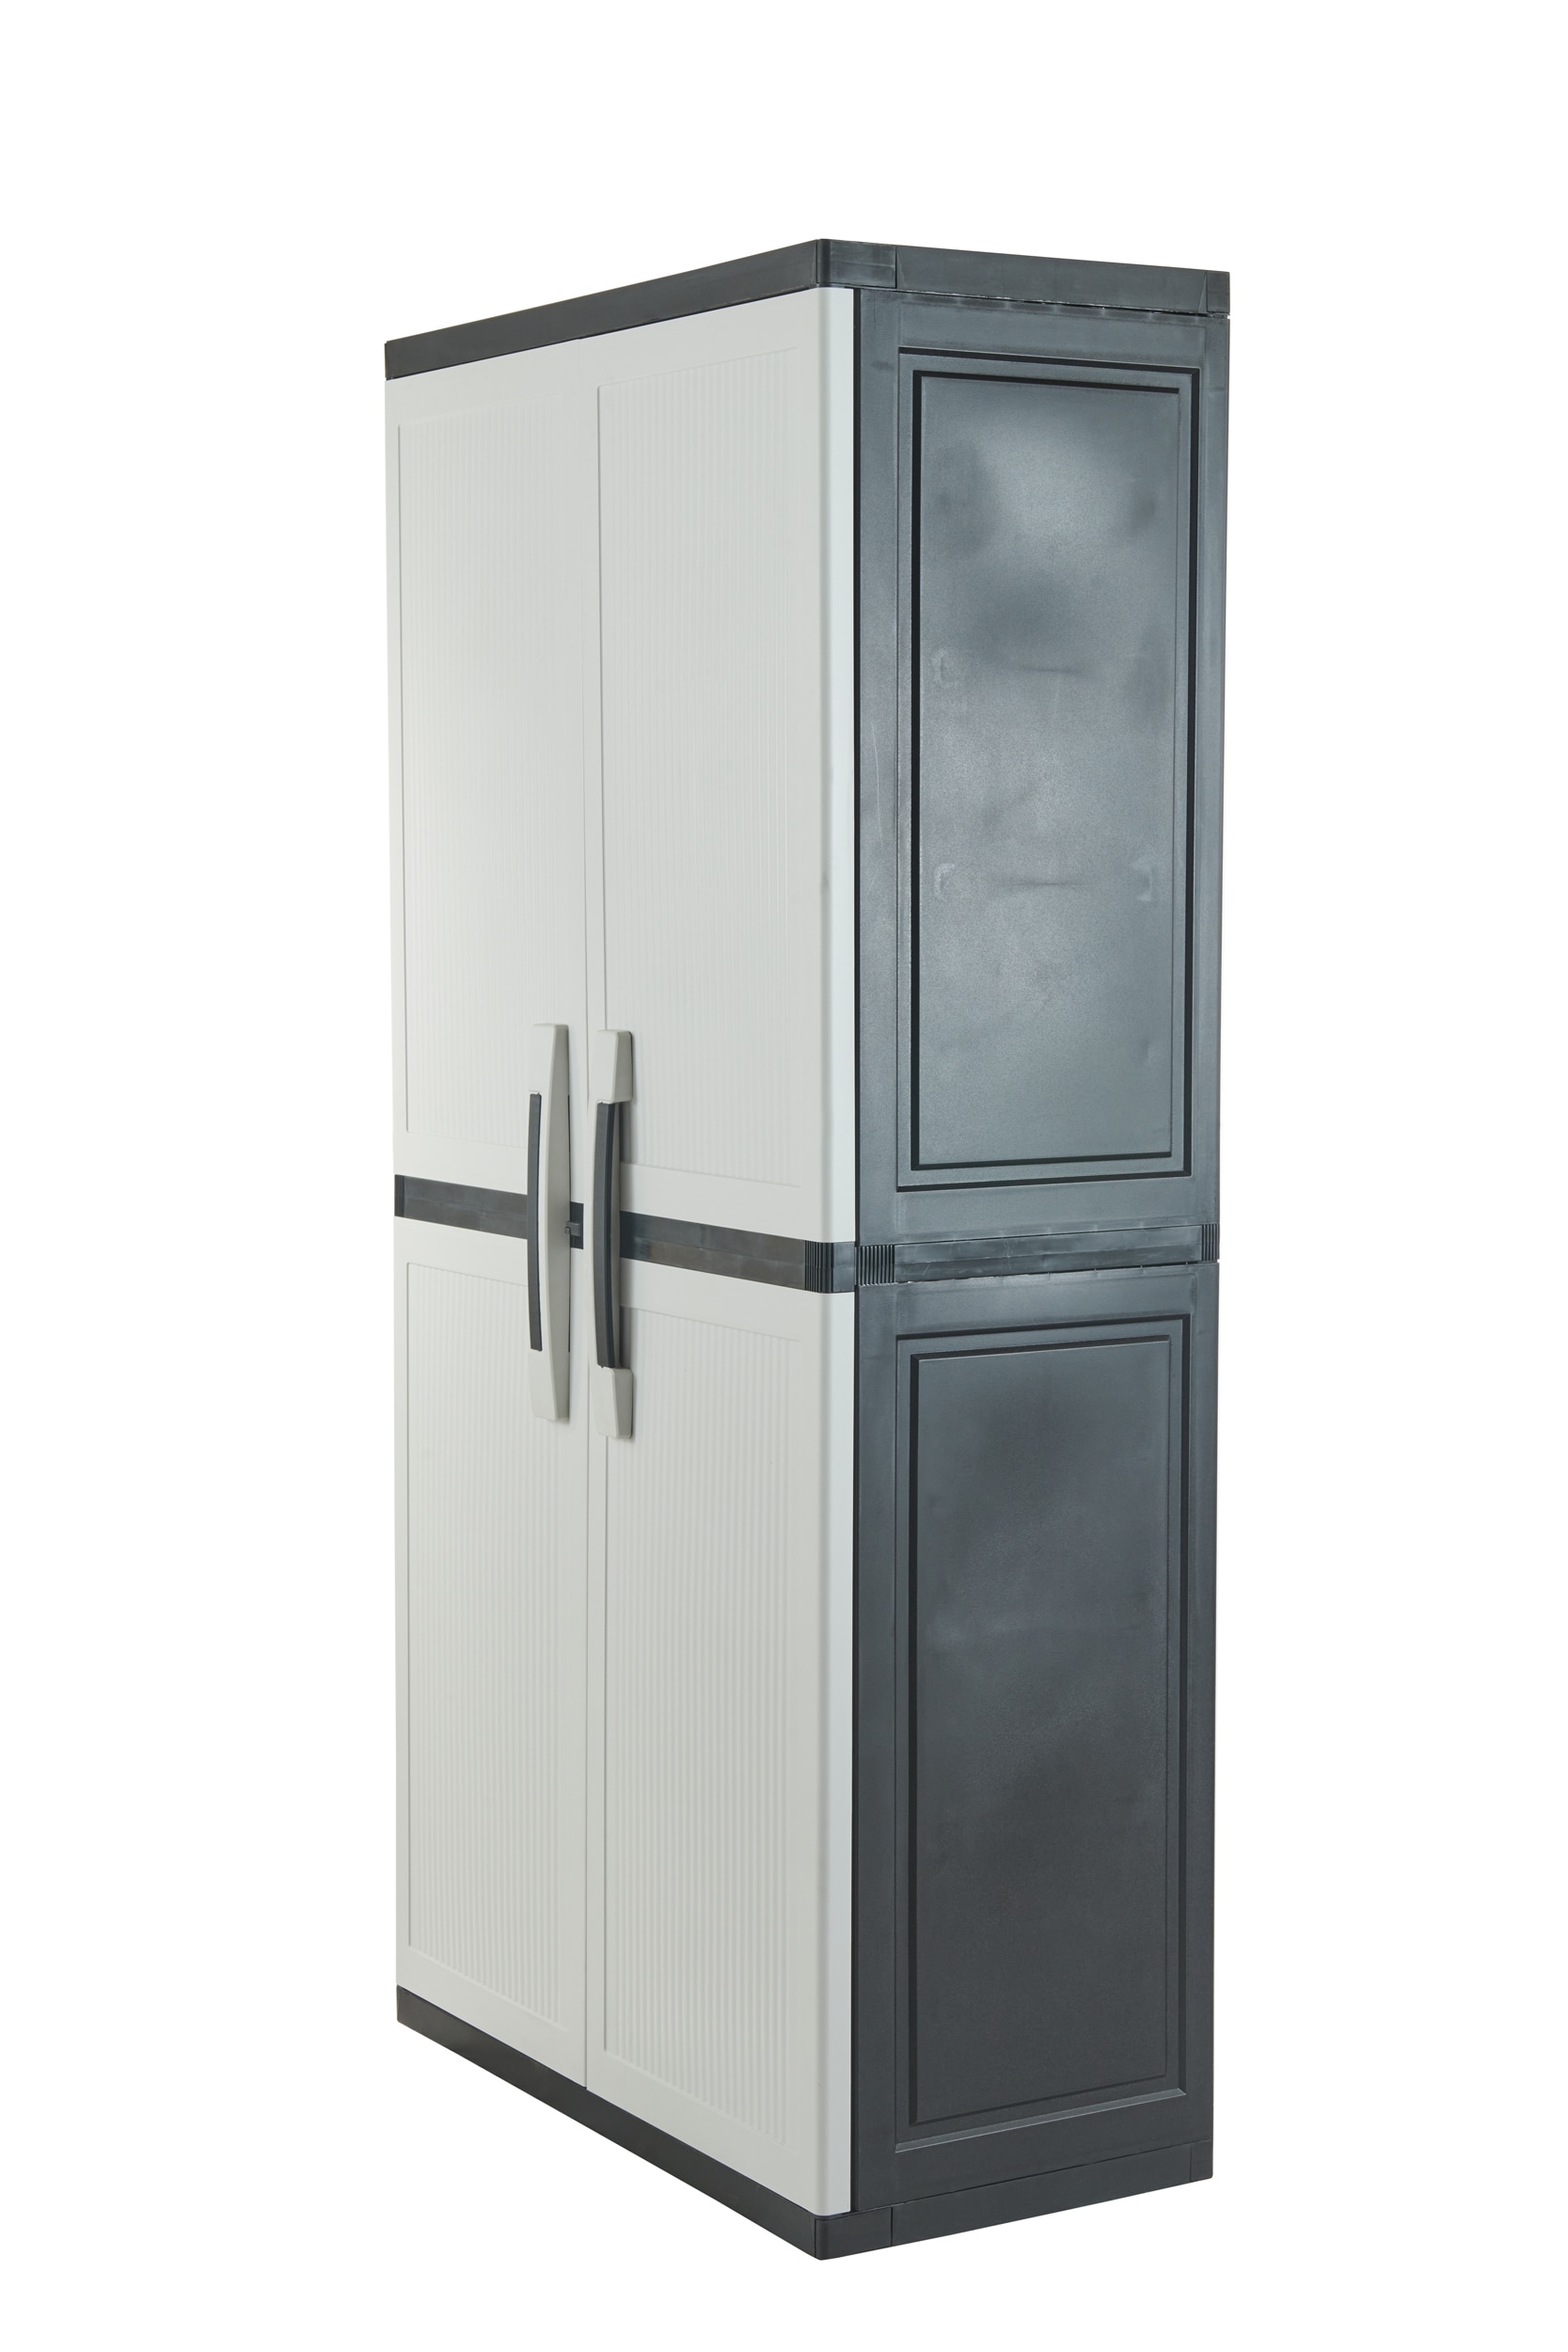 mengsel essence Scenario Keter Plastic Freestanding Garage Cabinet in Gray (34.5-in W x 70.8-in H x  17.5-in D) in the Garage Cabinets department at Lowes.com